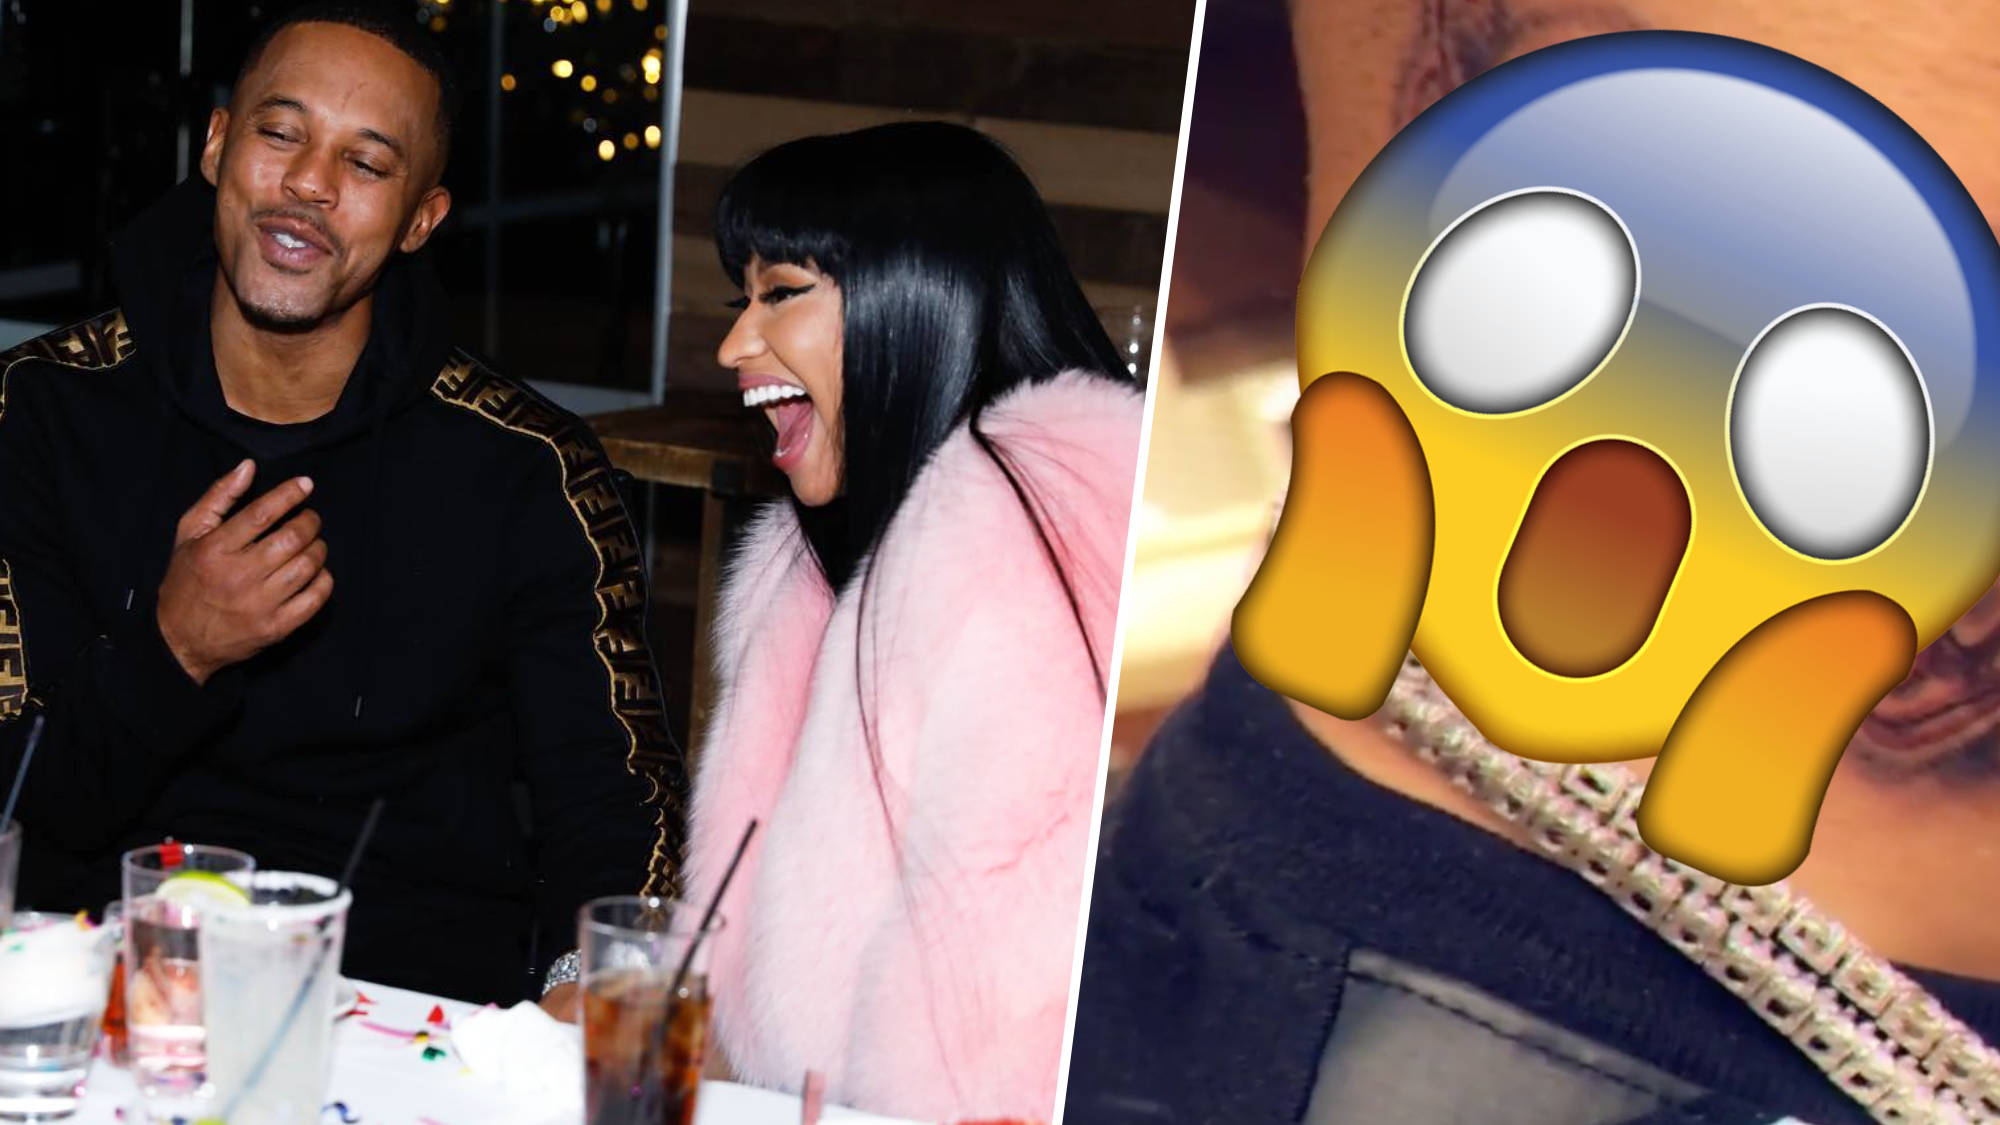 Nicki Minaj Cozies Up to New BF Who is a Convicted Sex Offender.